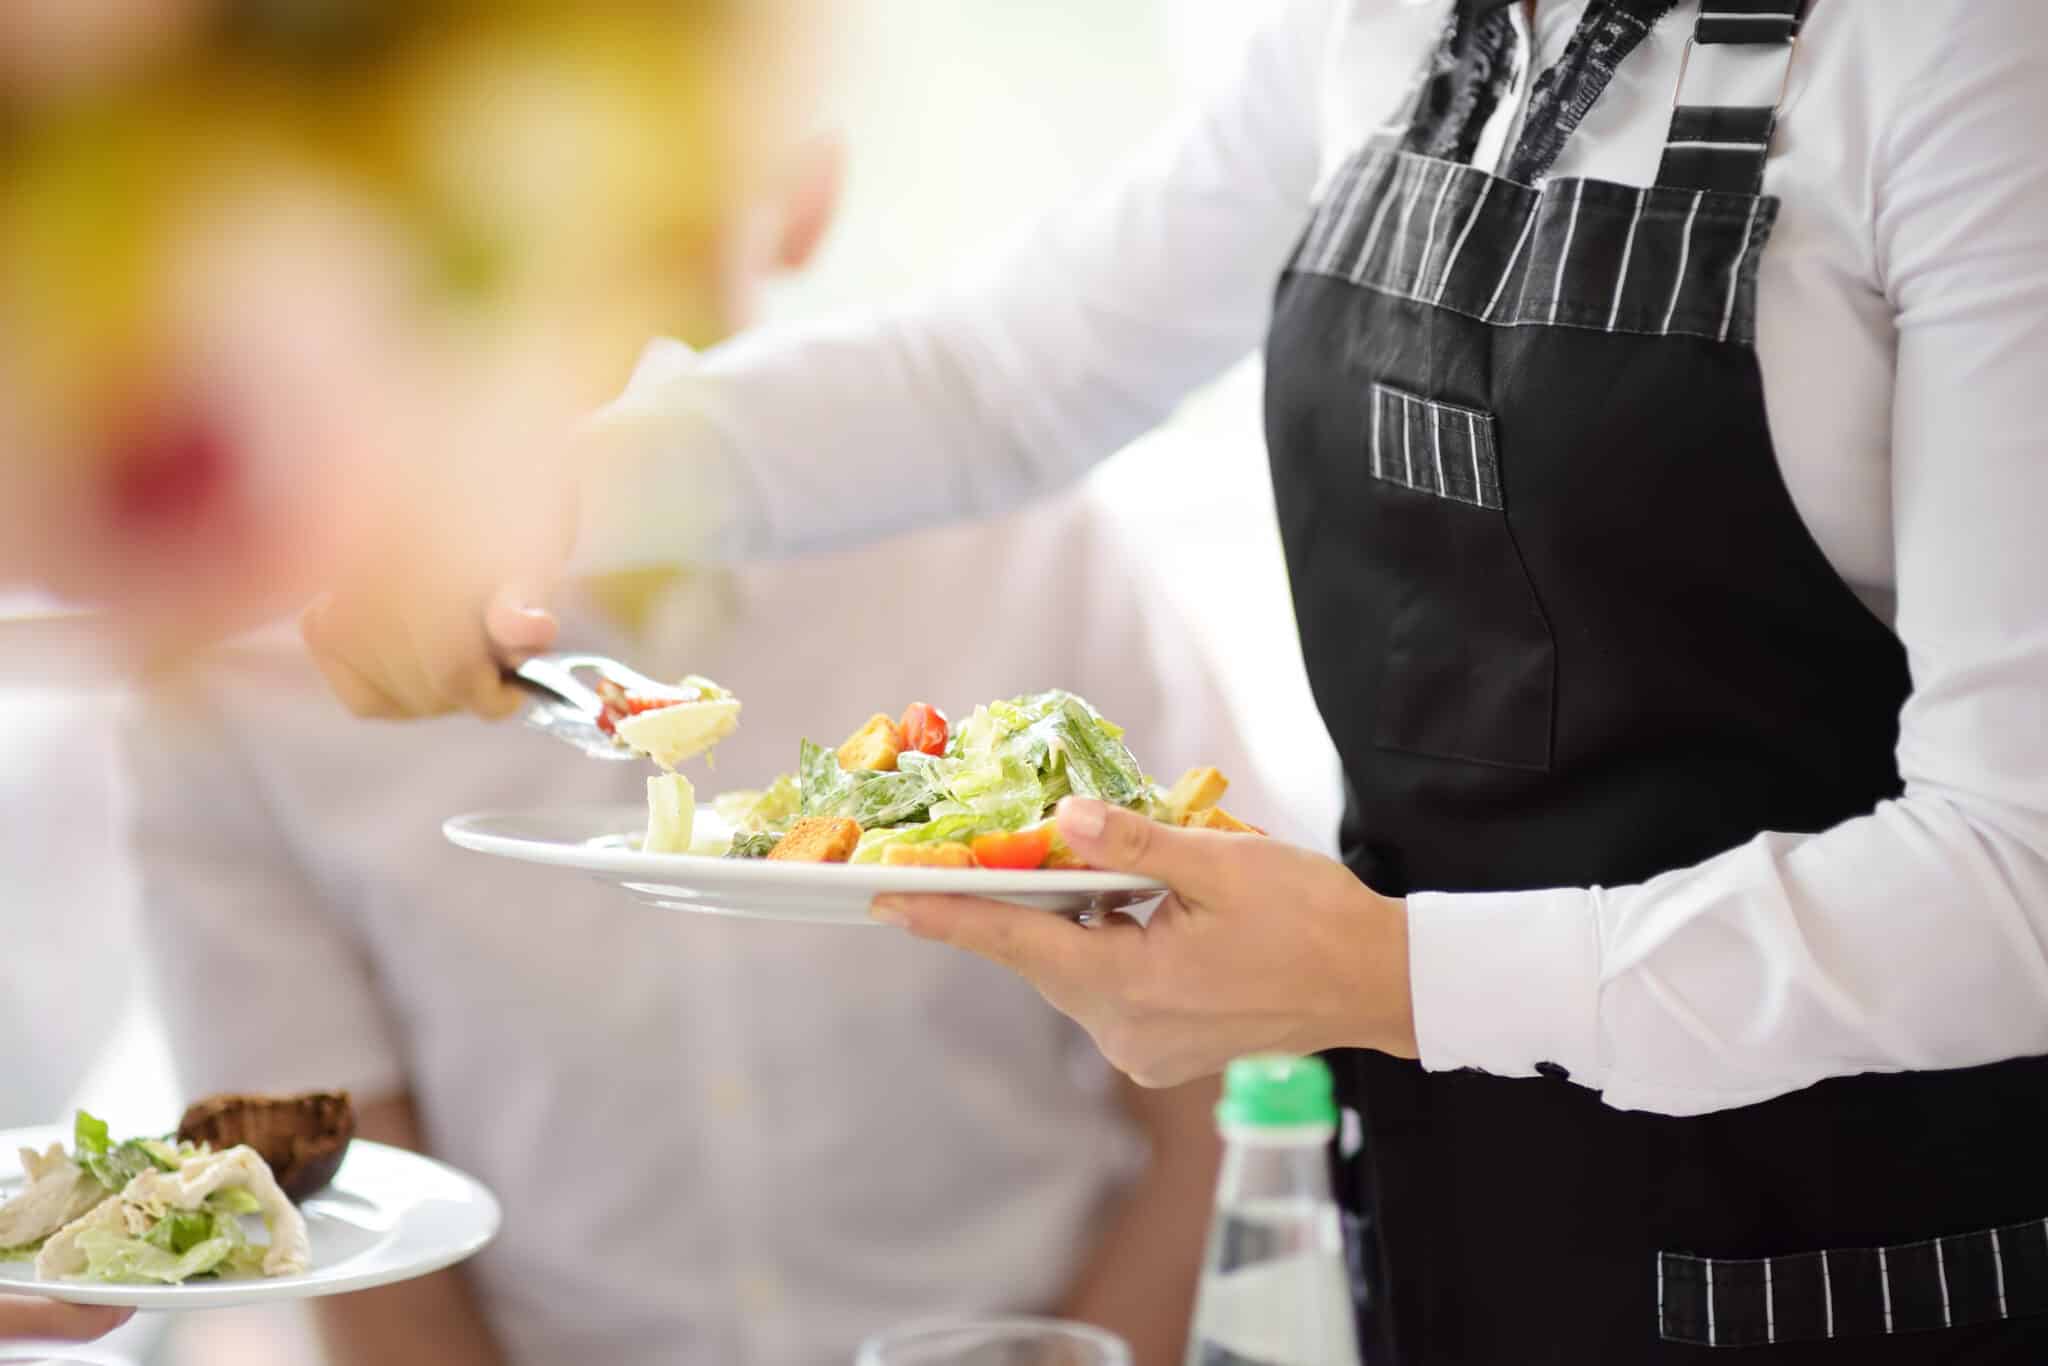 Waiter carrying plates with salad on some festive event, party or wedding reception